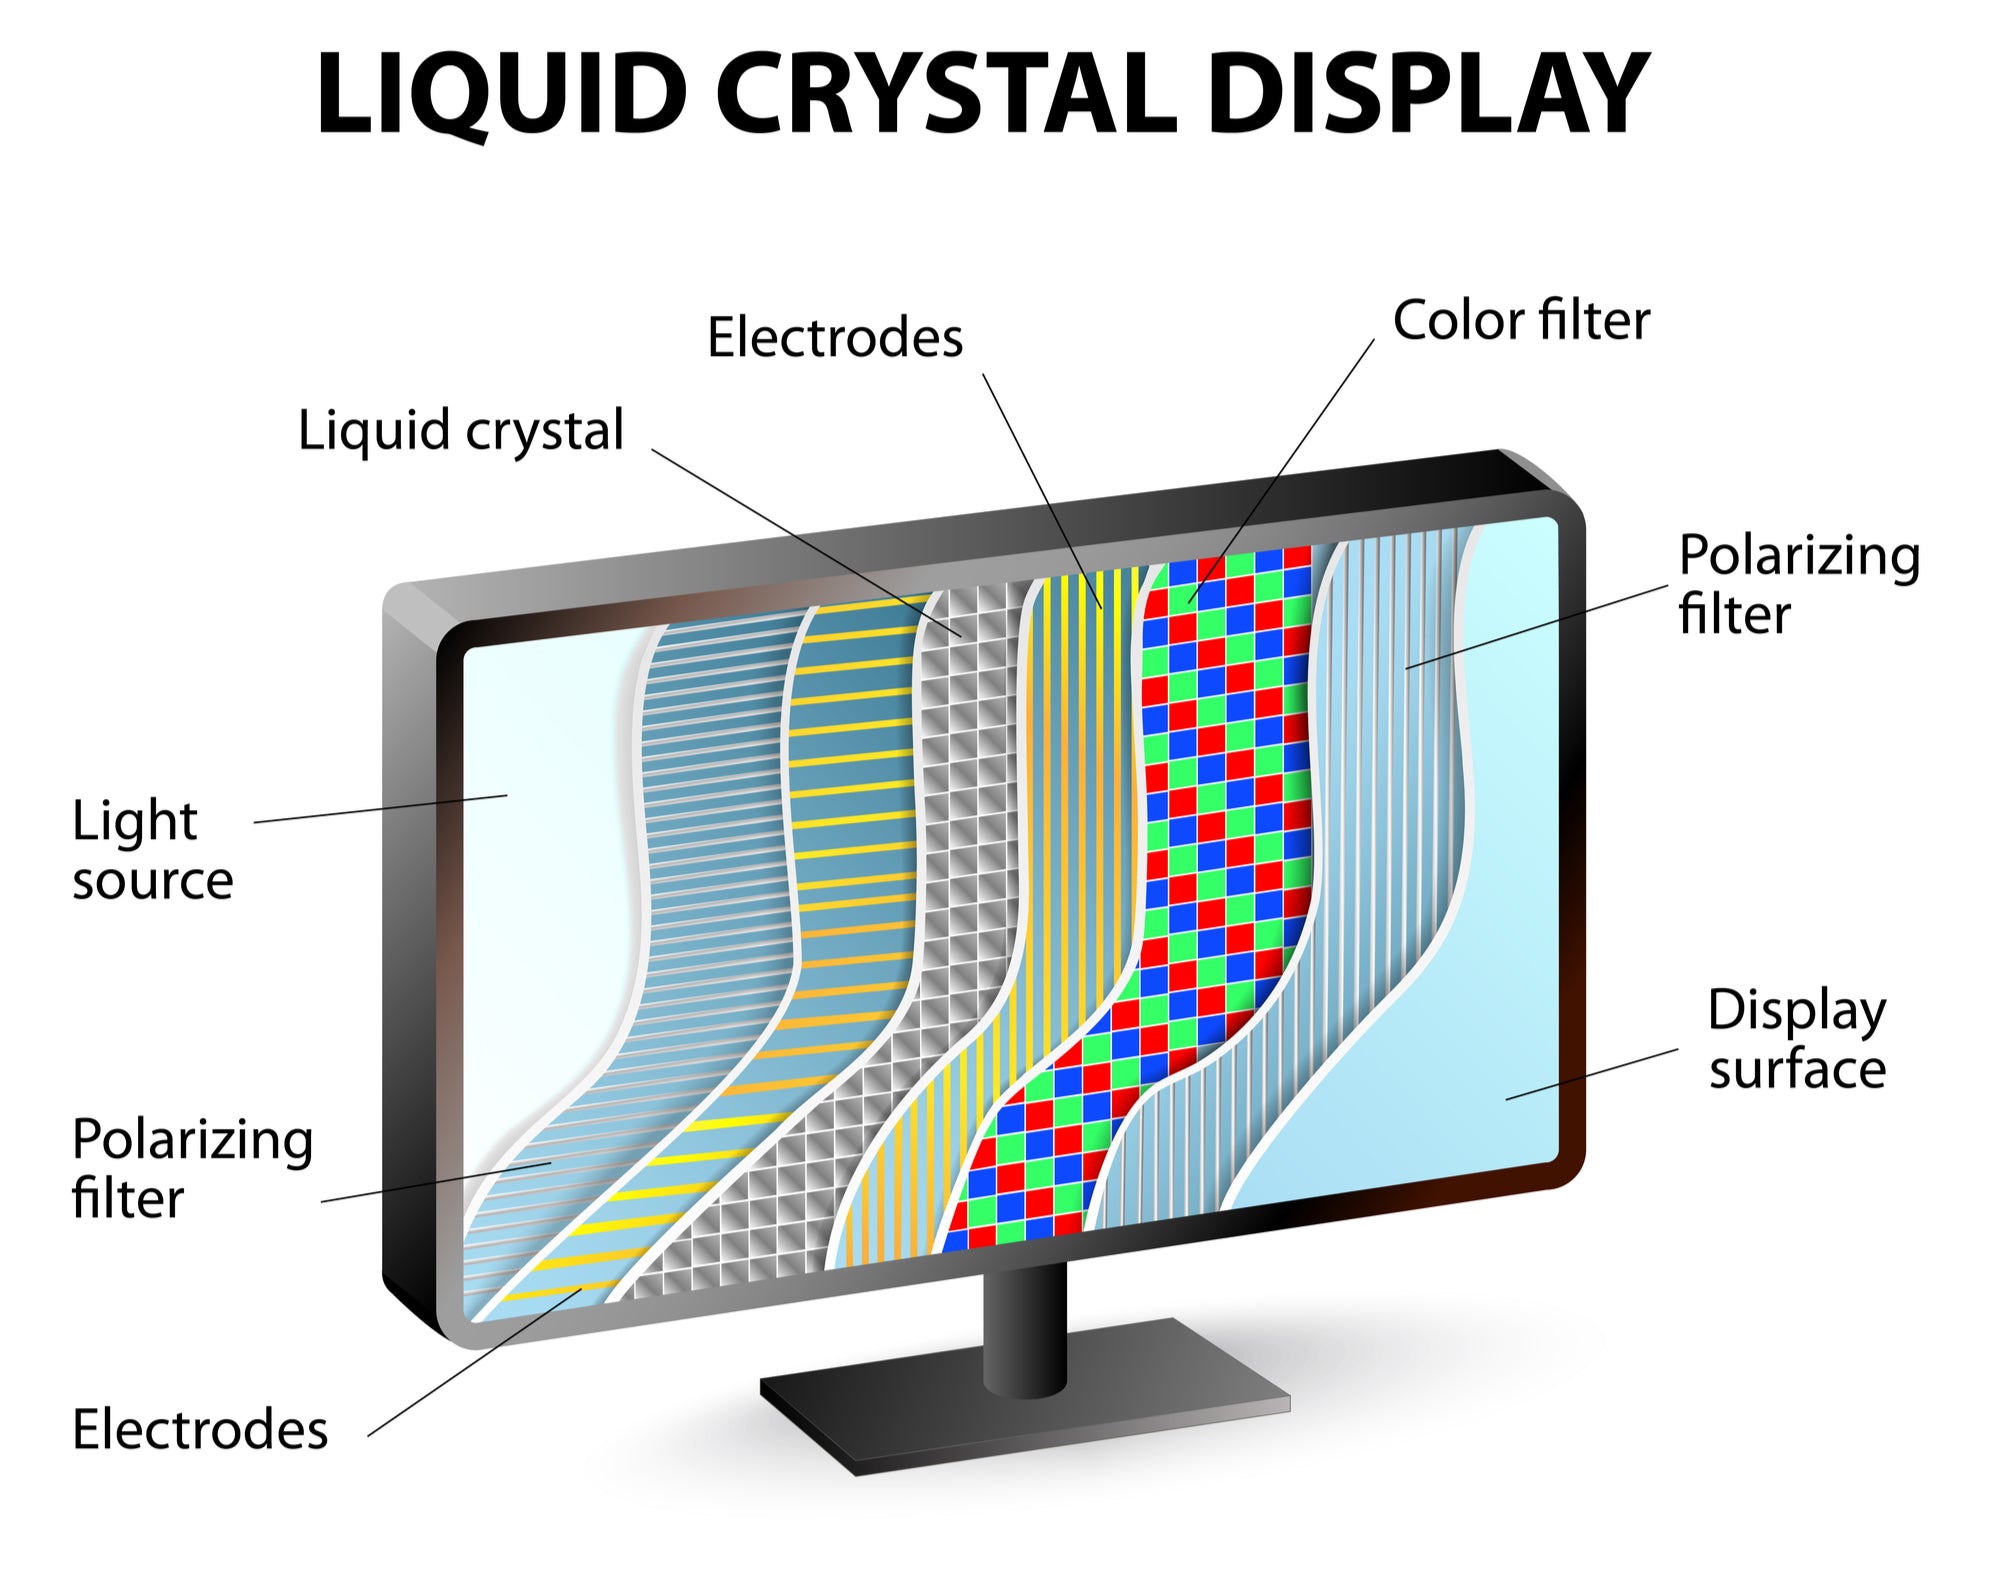 What is LCD means?